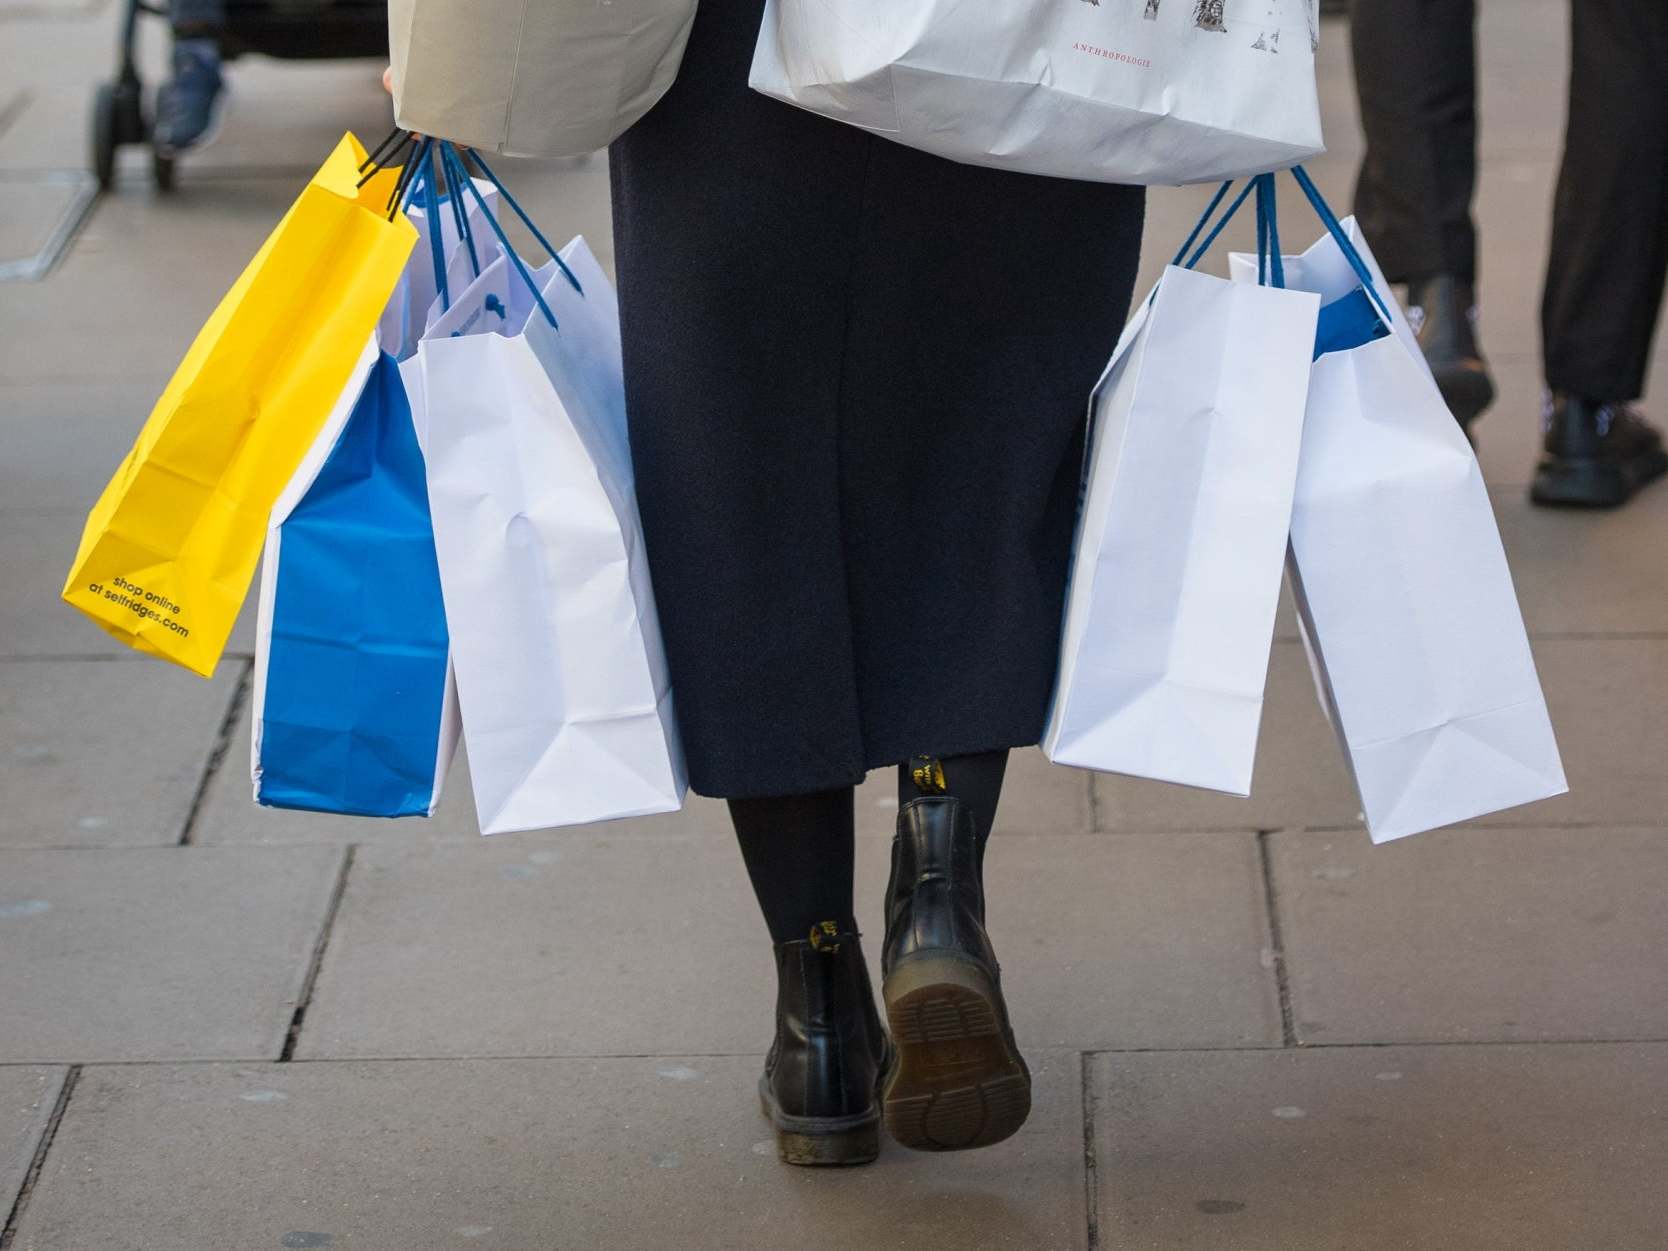 Online shopping has had a detrimental impact on both the high street and the environment